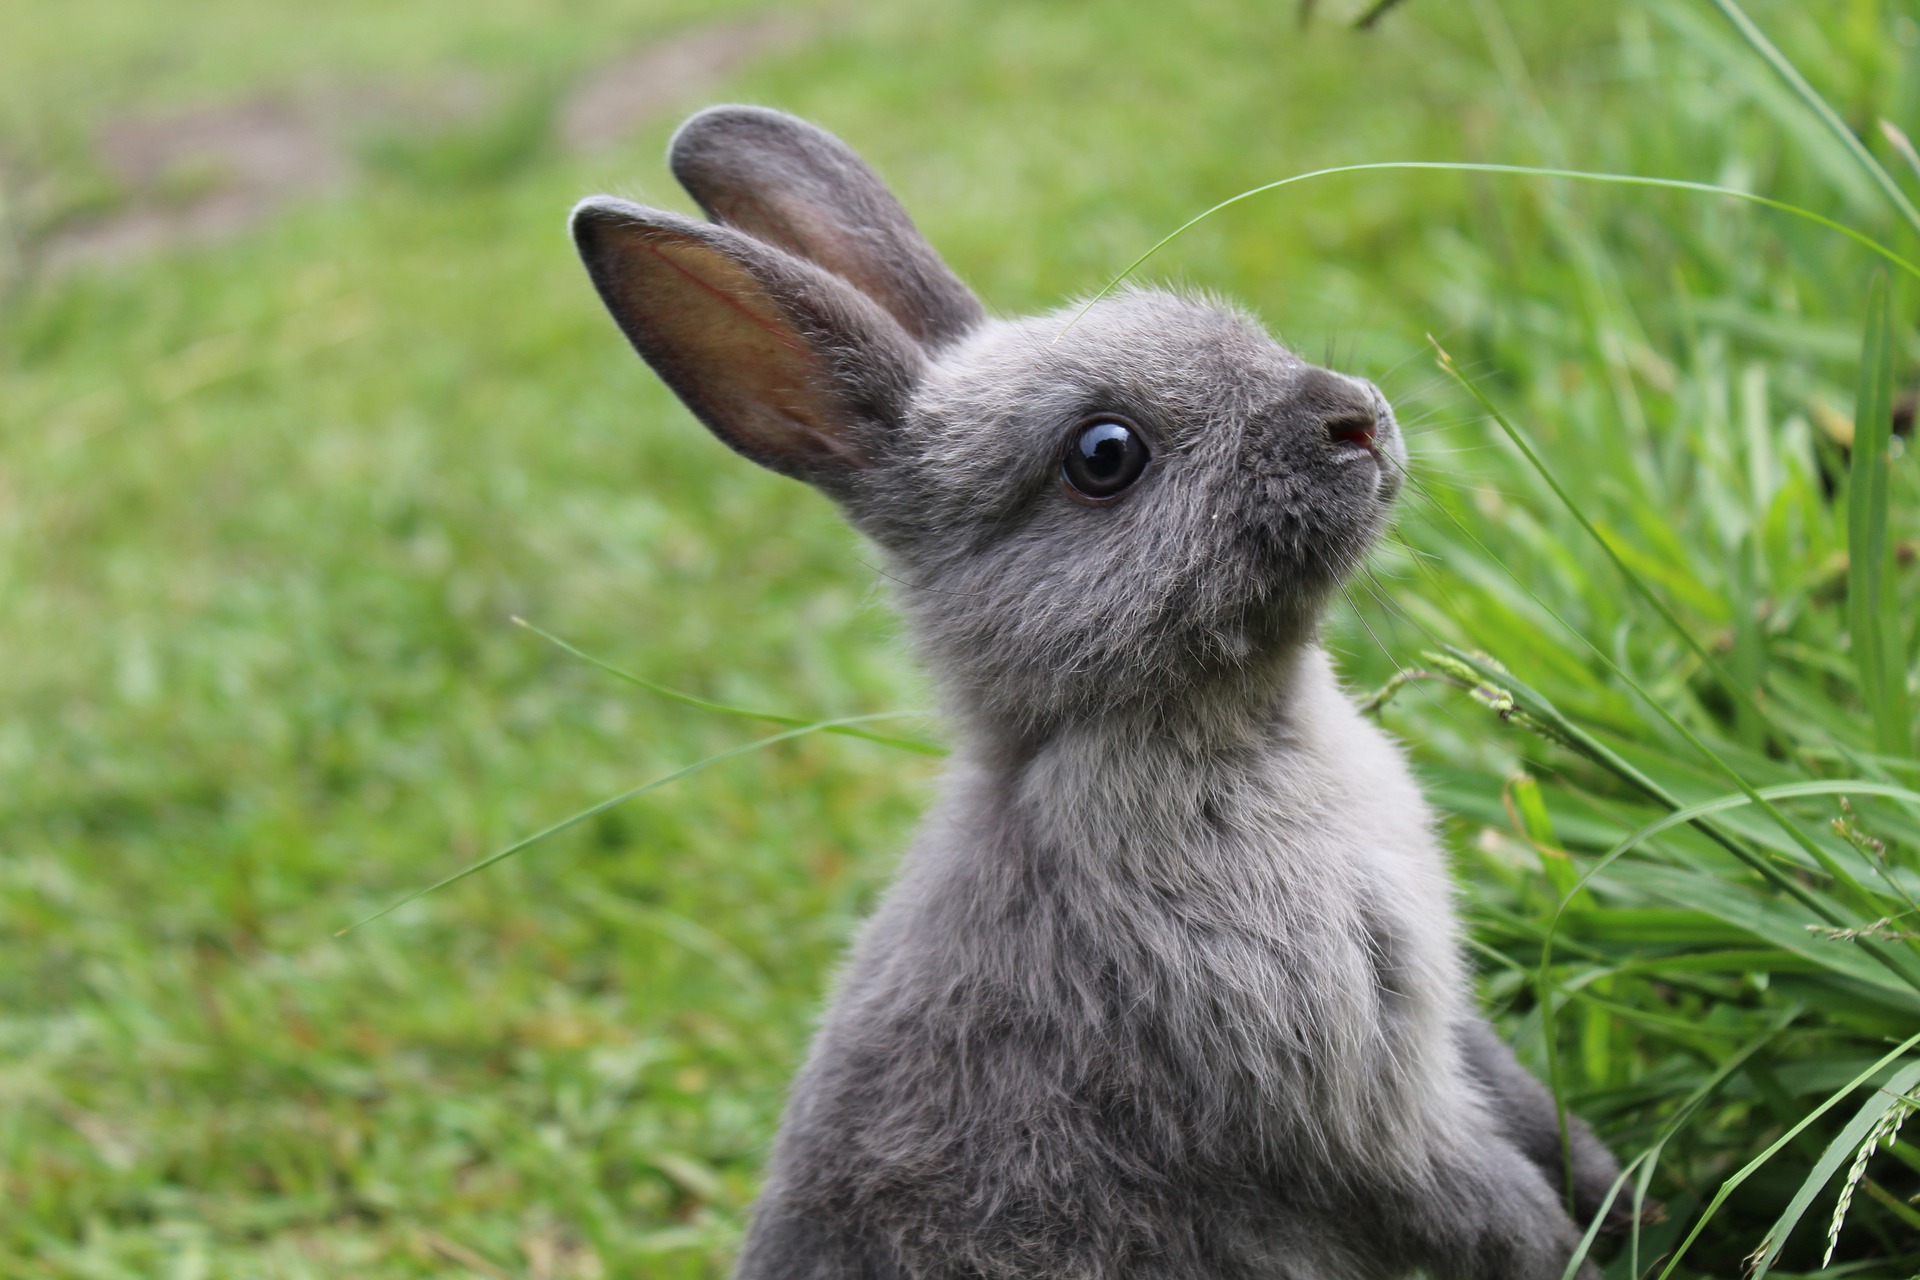 Do all rabbits have ears?